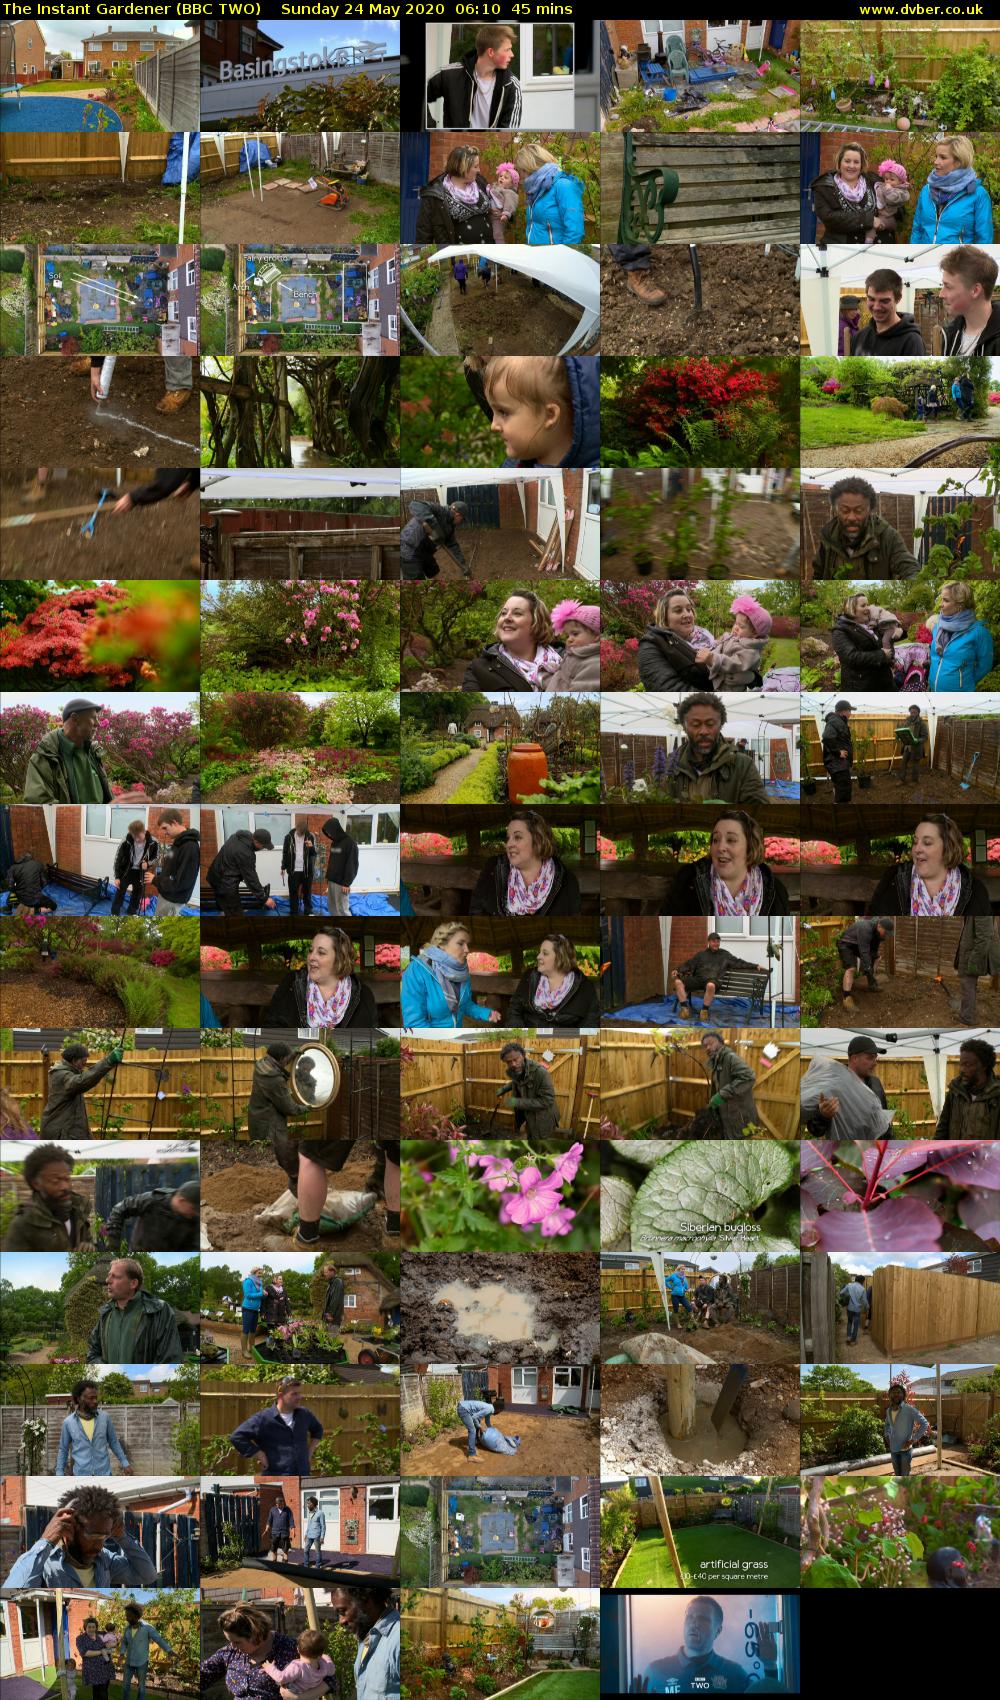 The Instant Gardener (BBC TWO) Sunday 24 May 2020 06:10 - 06:55